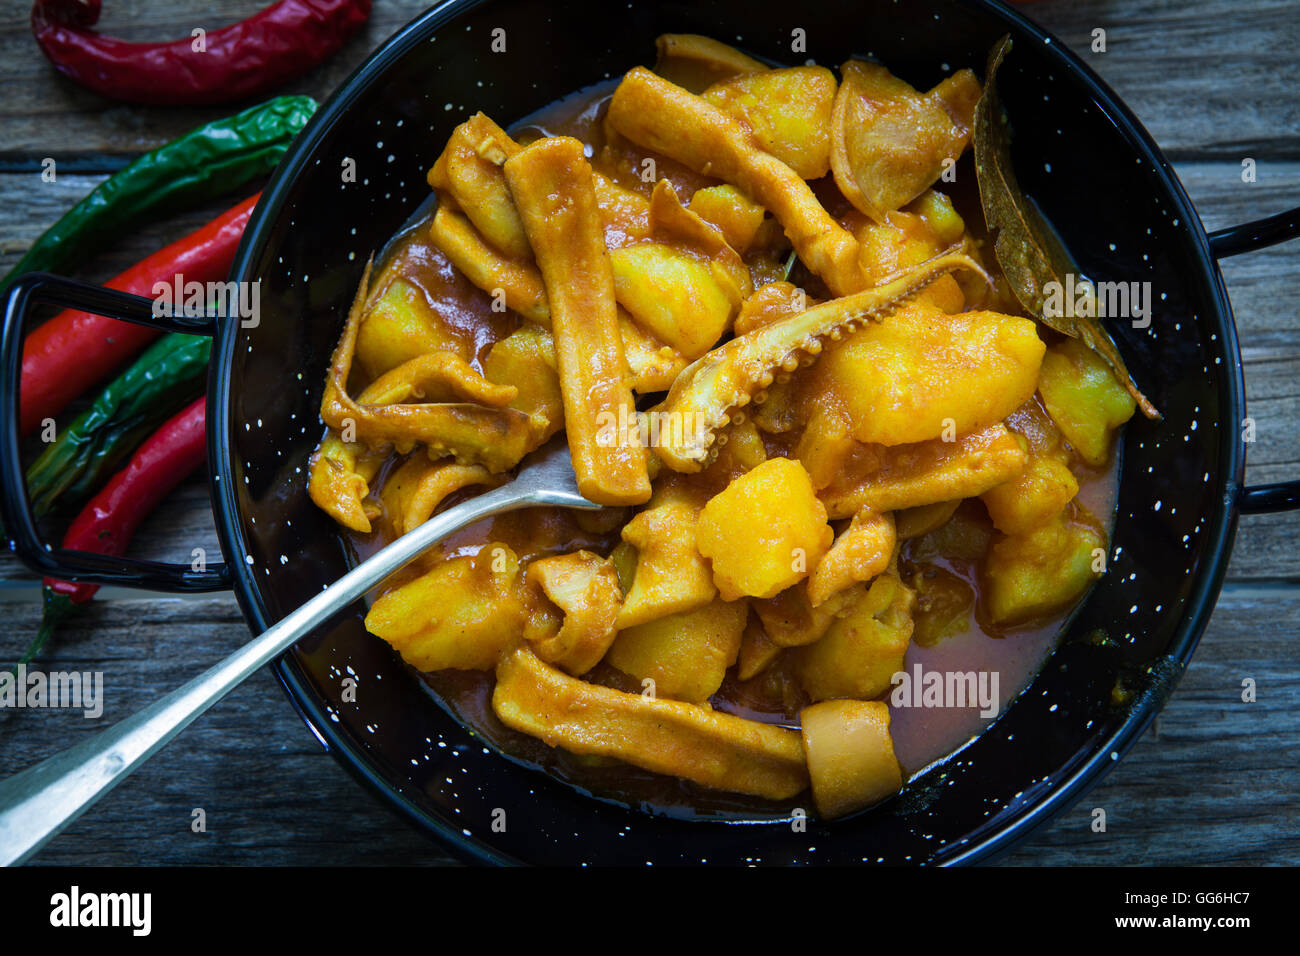 seafood plate with squid on tomato sauce with potatoes and onions Stock Photo